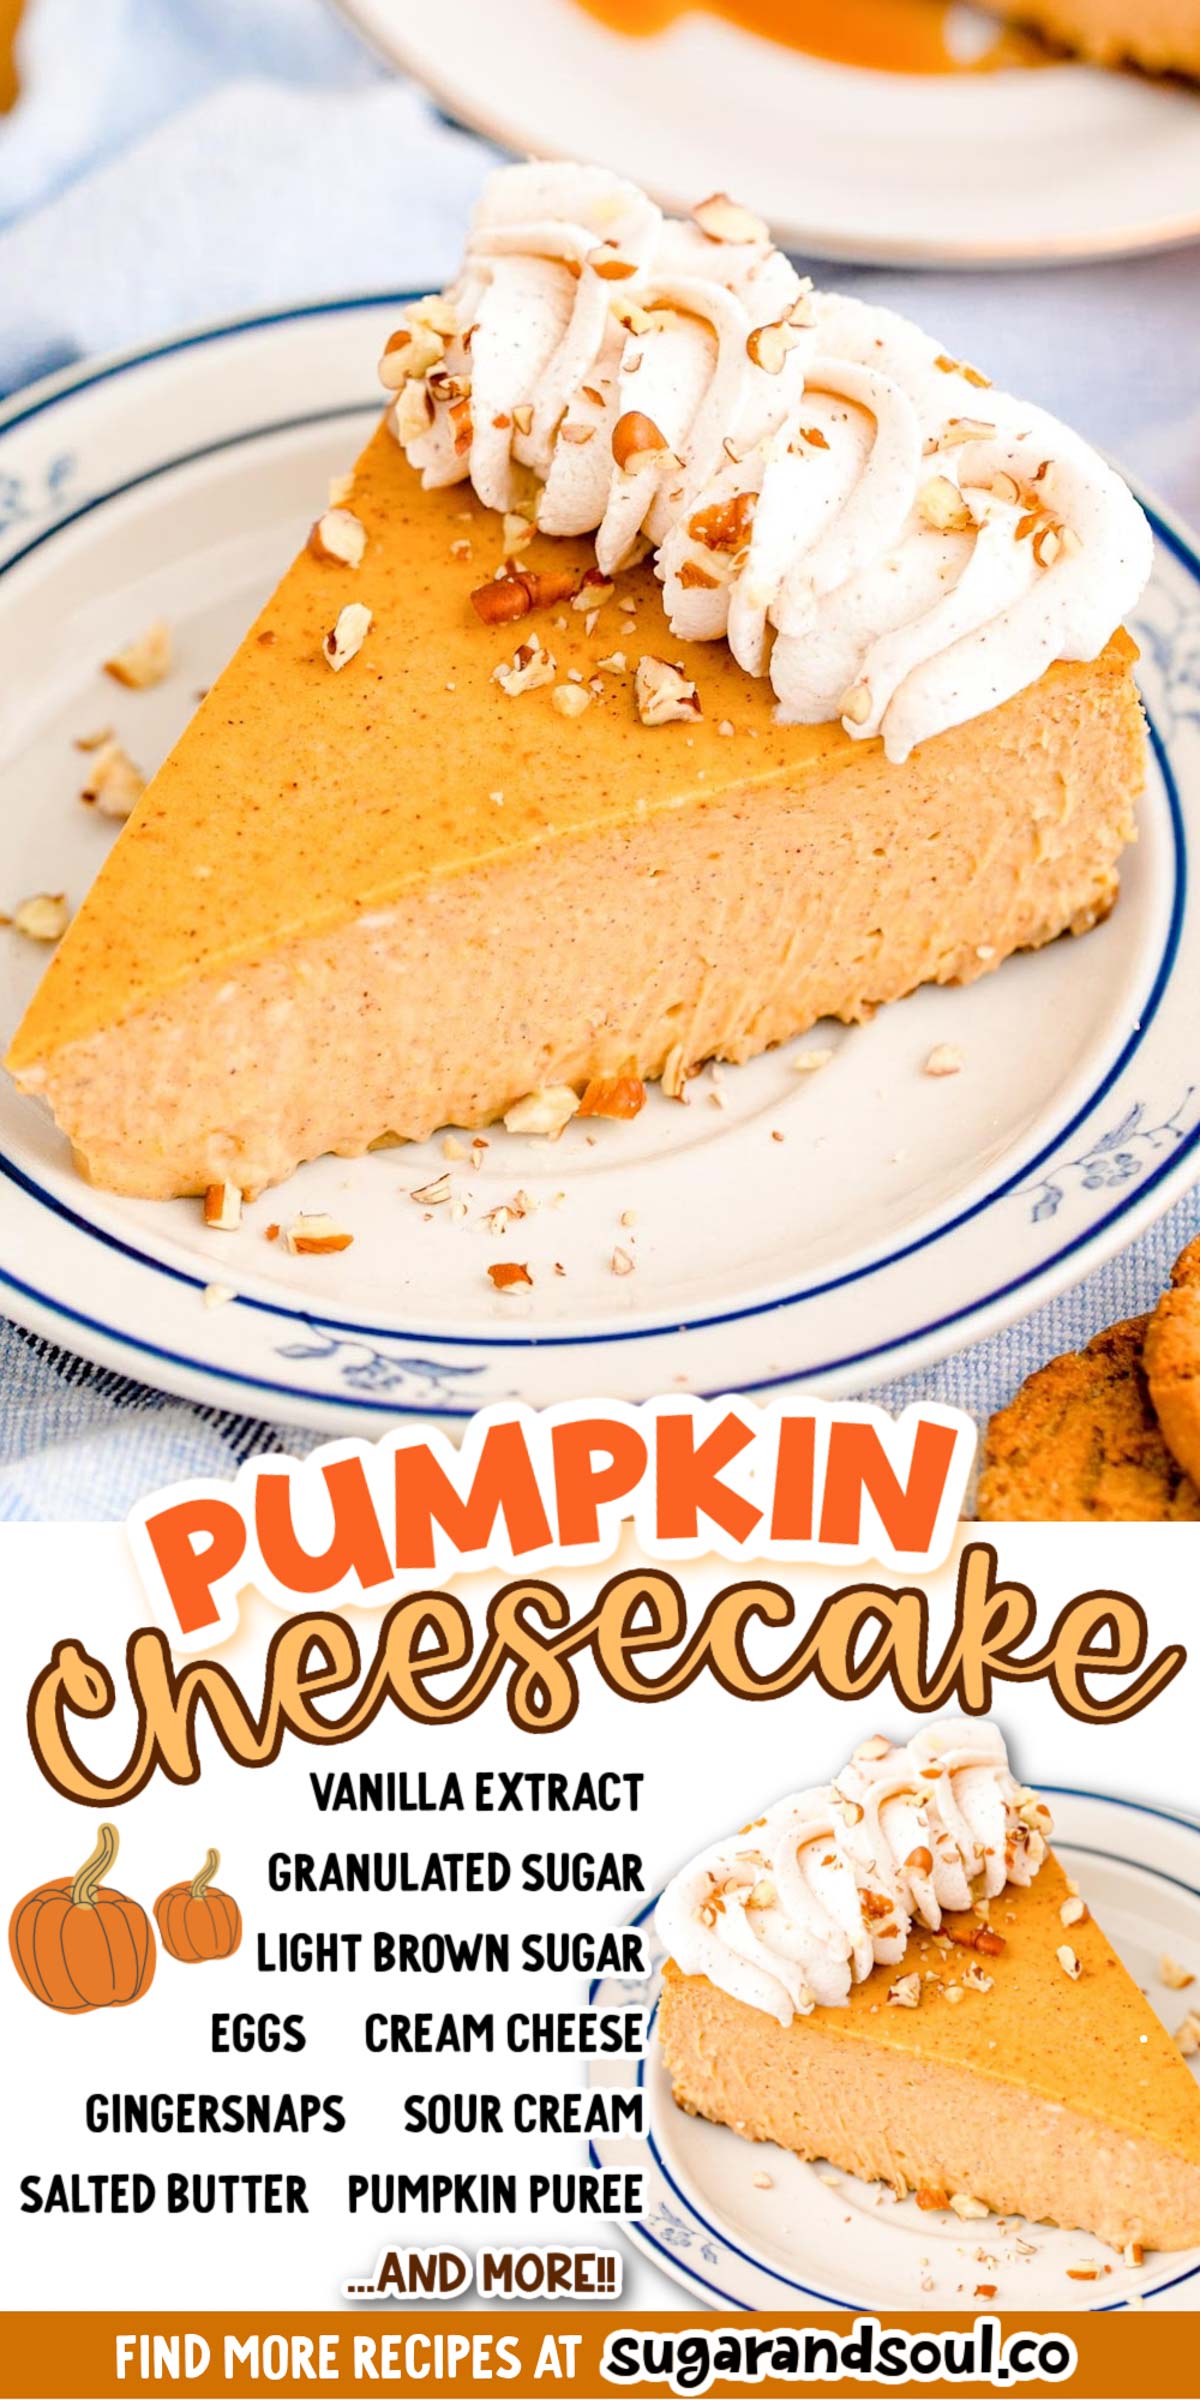 Pumpkin Cheesecake is a cozy bite of everything you love about the chilly fall season tucked into a gingersnap crust! Filled with spices like cinnamon, nutmeg, cloves, and ginger! via @sugarandsoulco